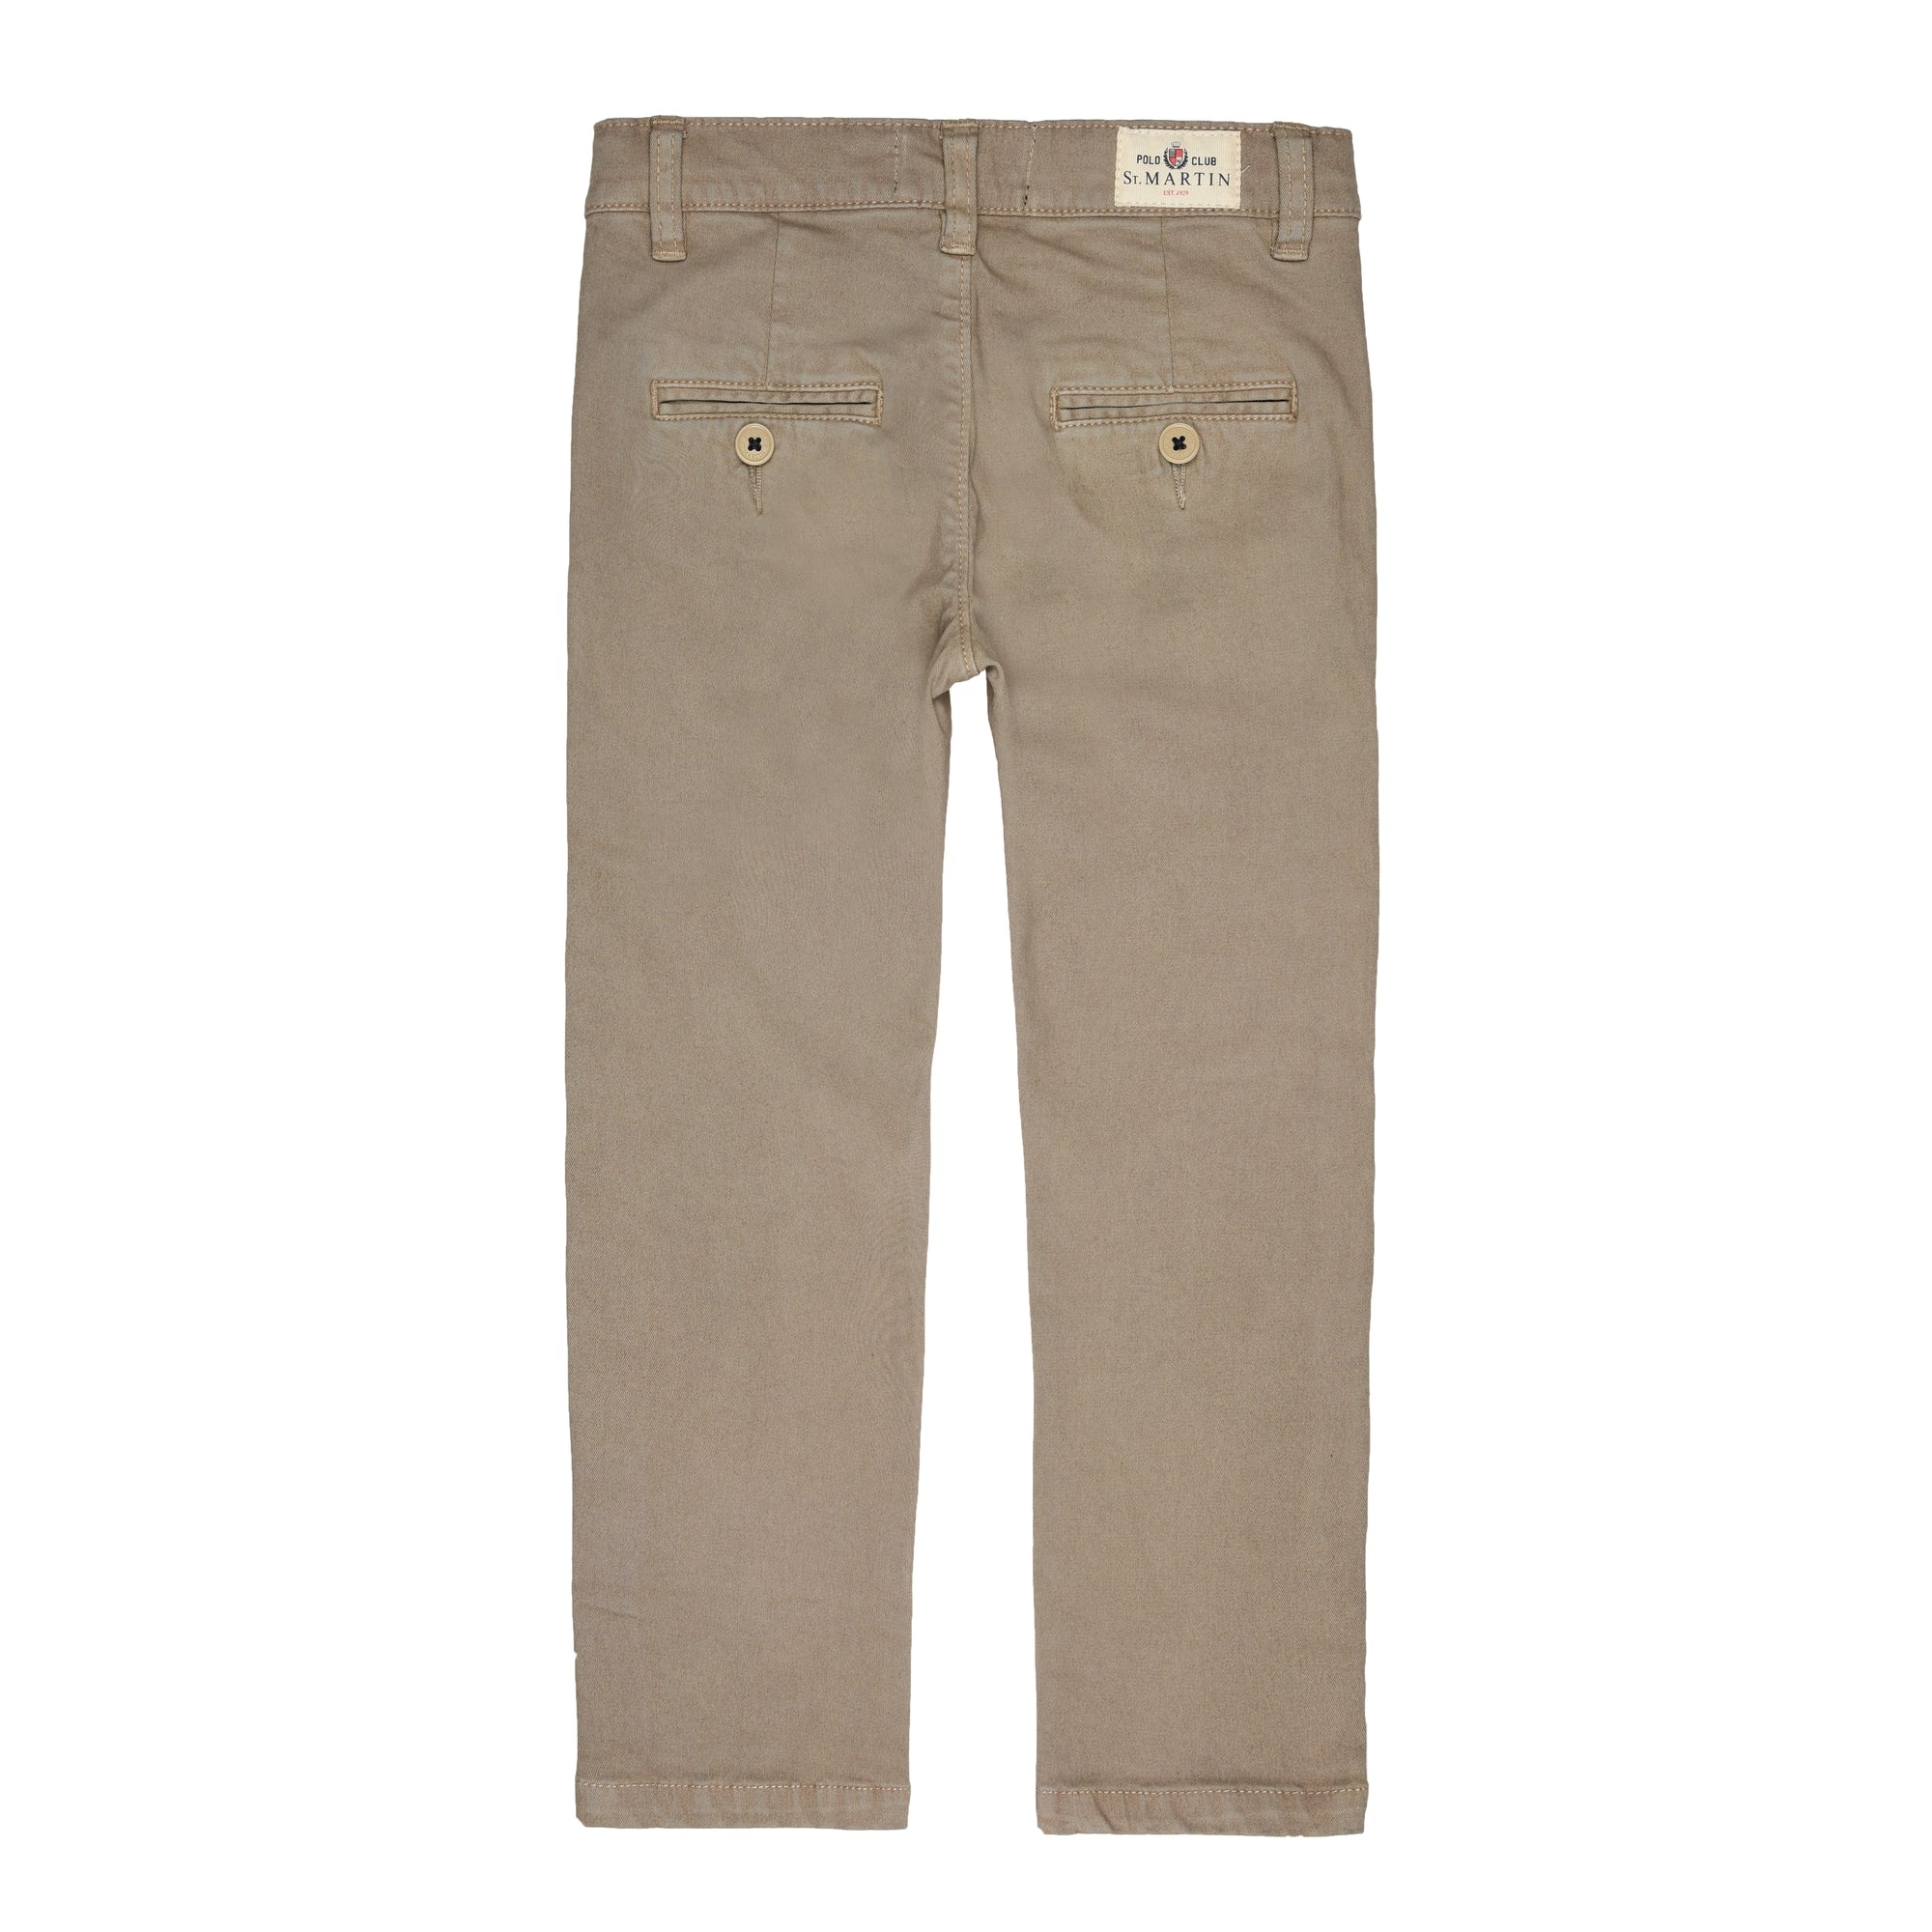 American pocket trousers